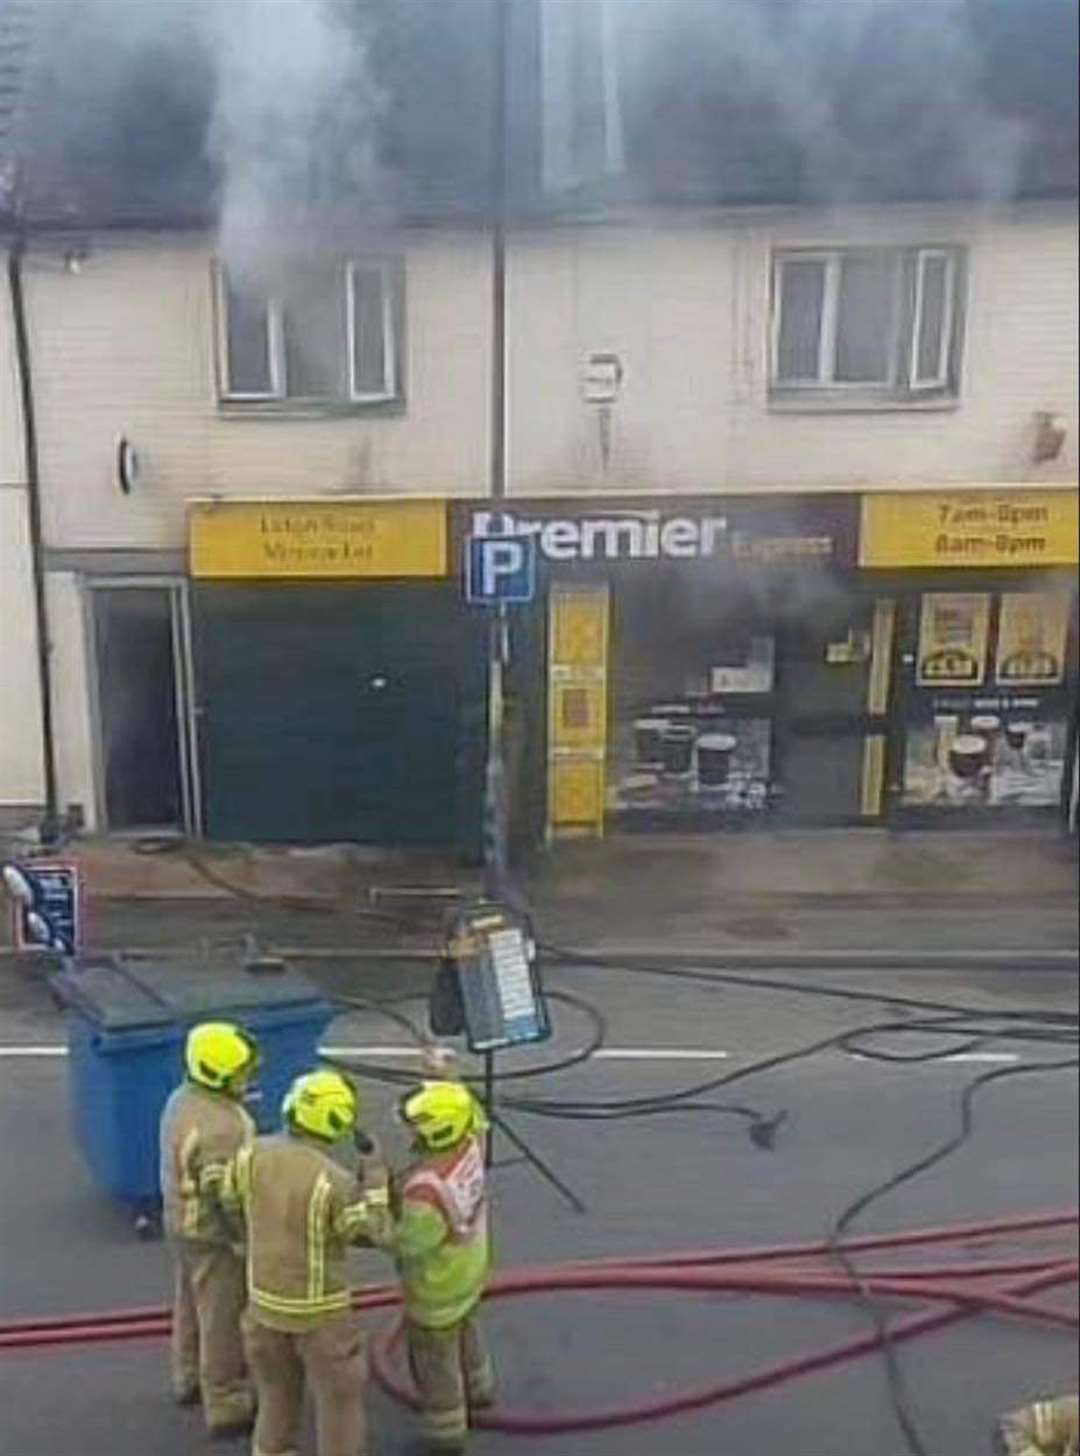 A fire has broke out at a Premier Store in Luton Road, Chatham. Picture: Angela Louise Fox